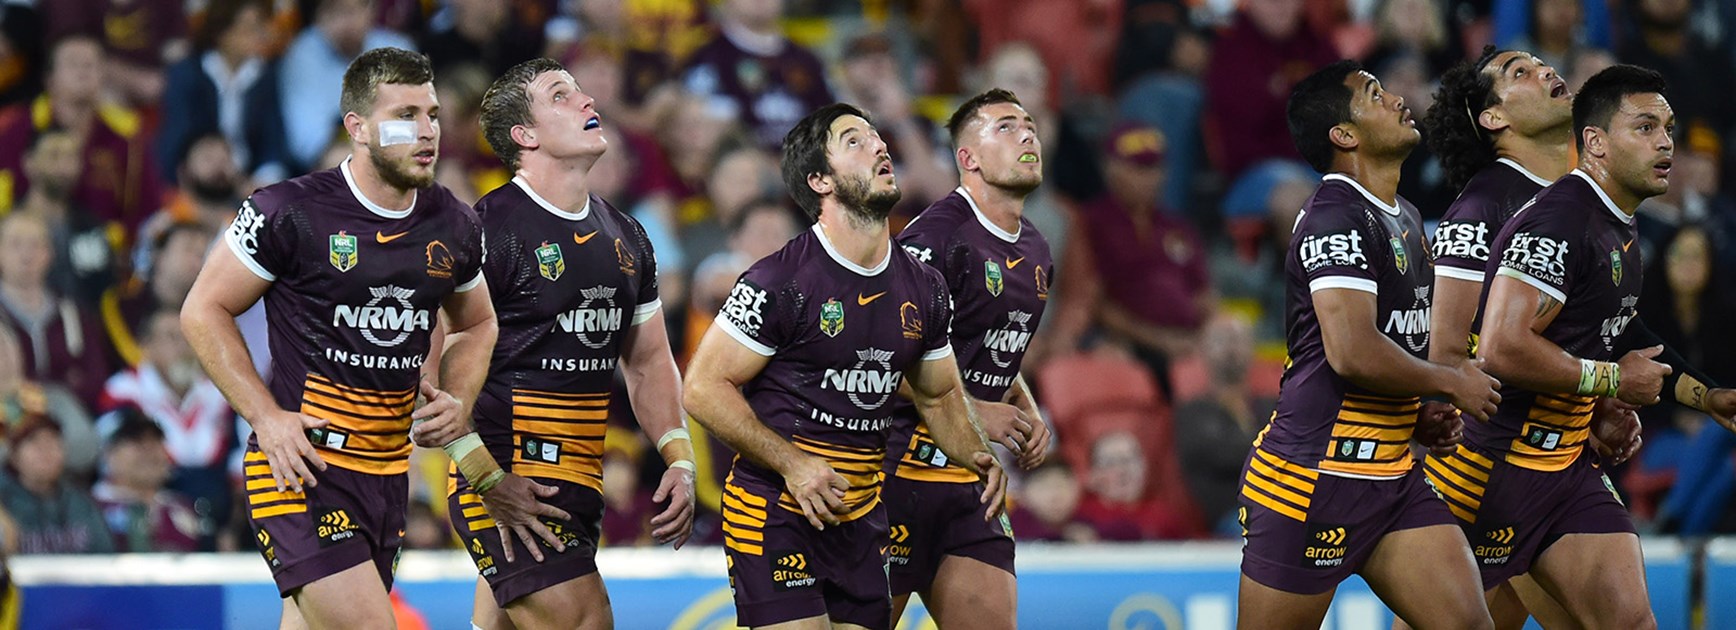 Brisbane Broncos suffered a tight defeat at the hands of Wests Tigers in Round 12.